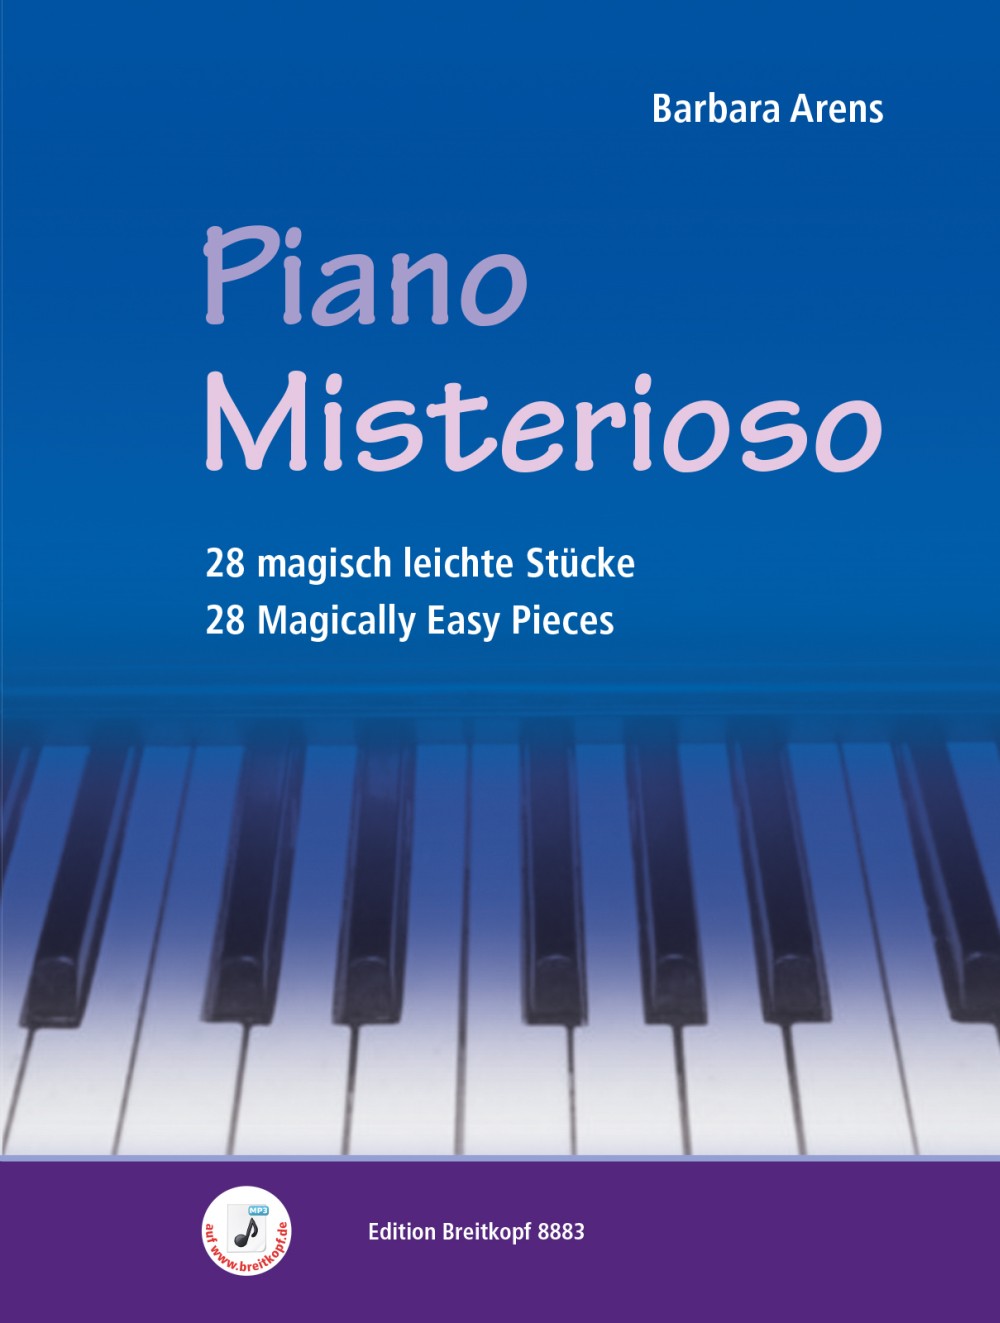 Arens Piano Misterioso 28 Magically Easy Pieces for Piano